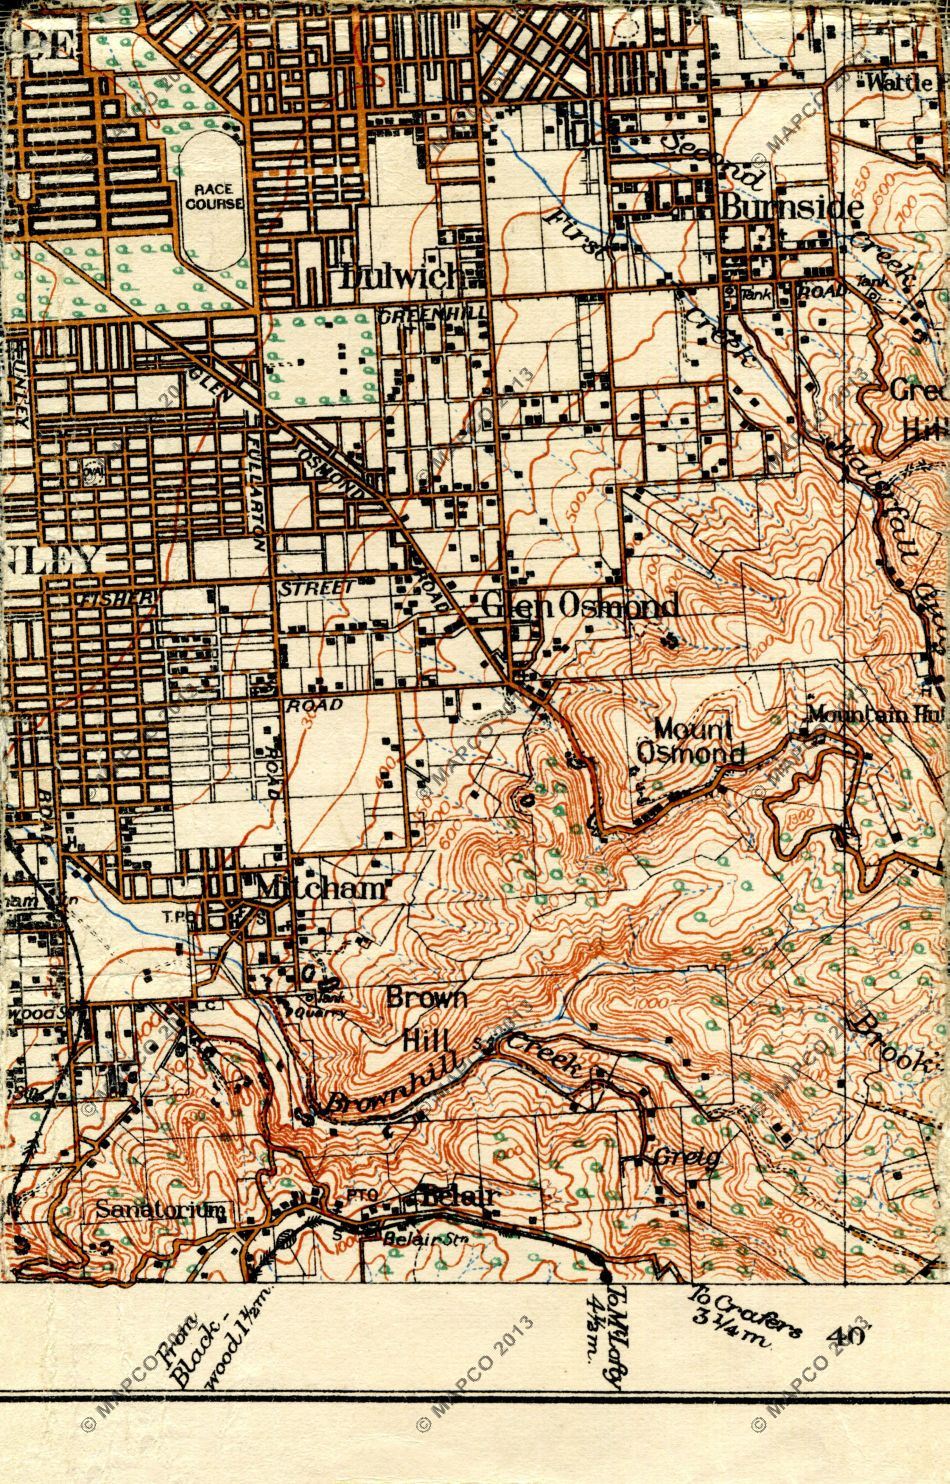 Click For An Enlarged Map Image